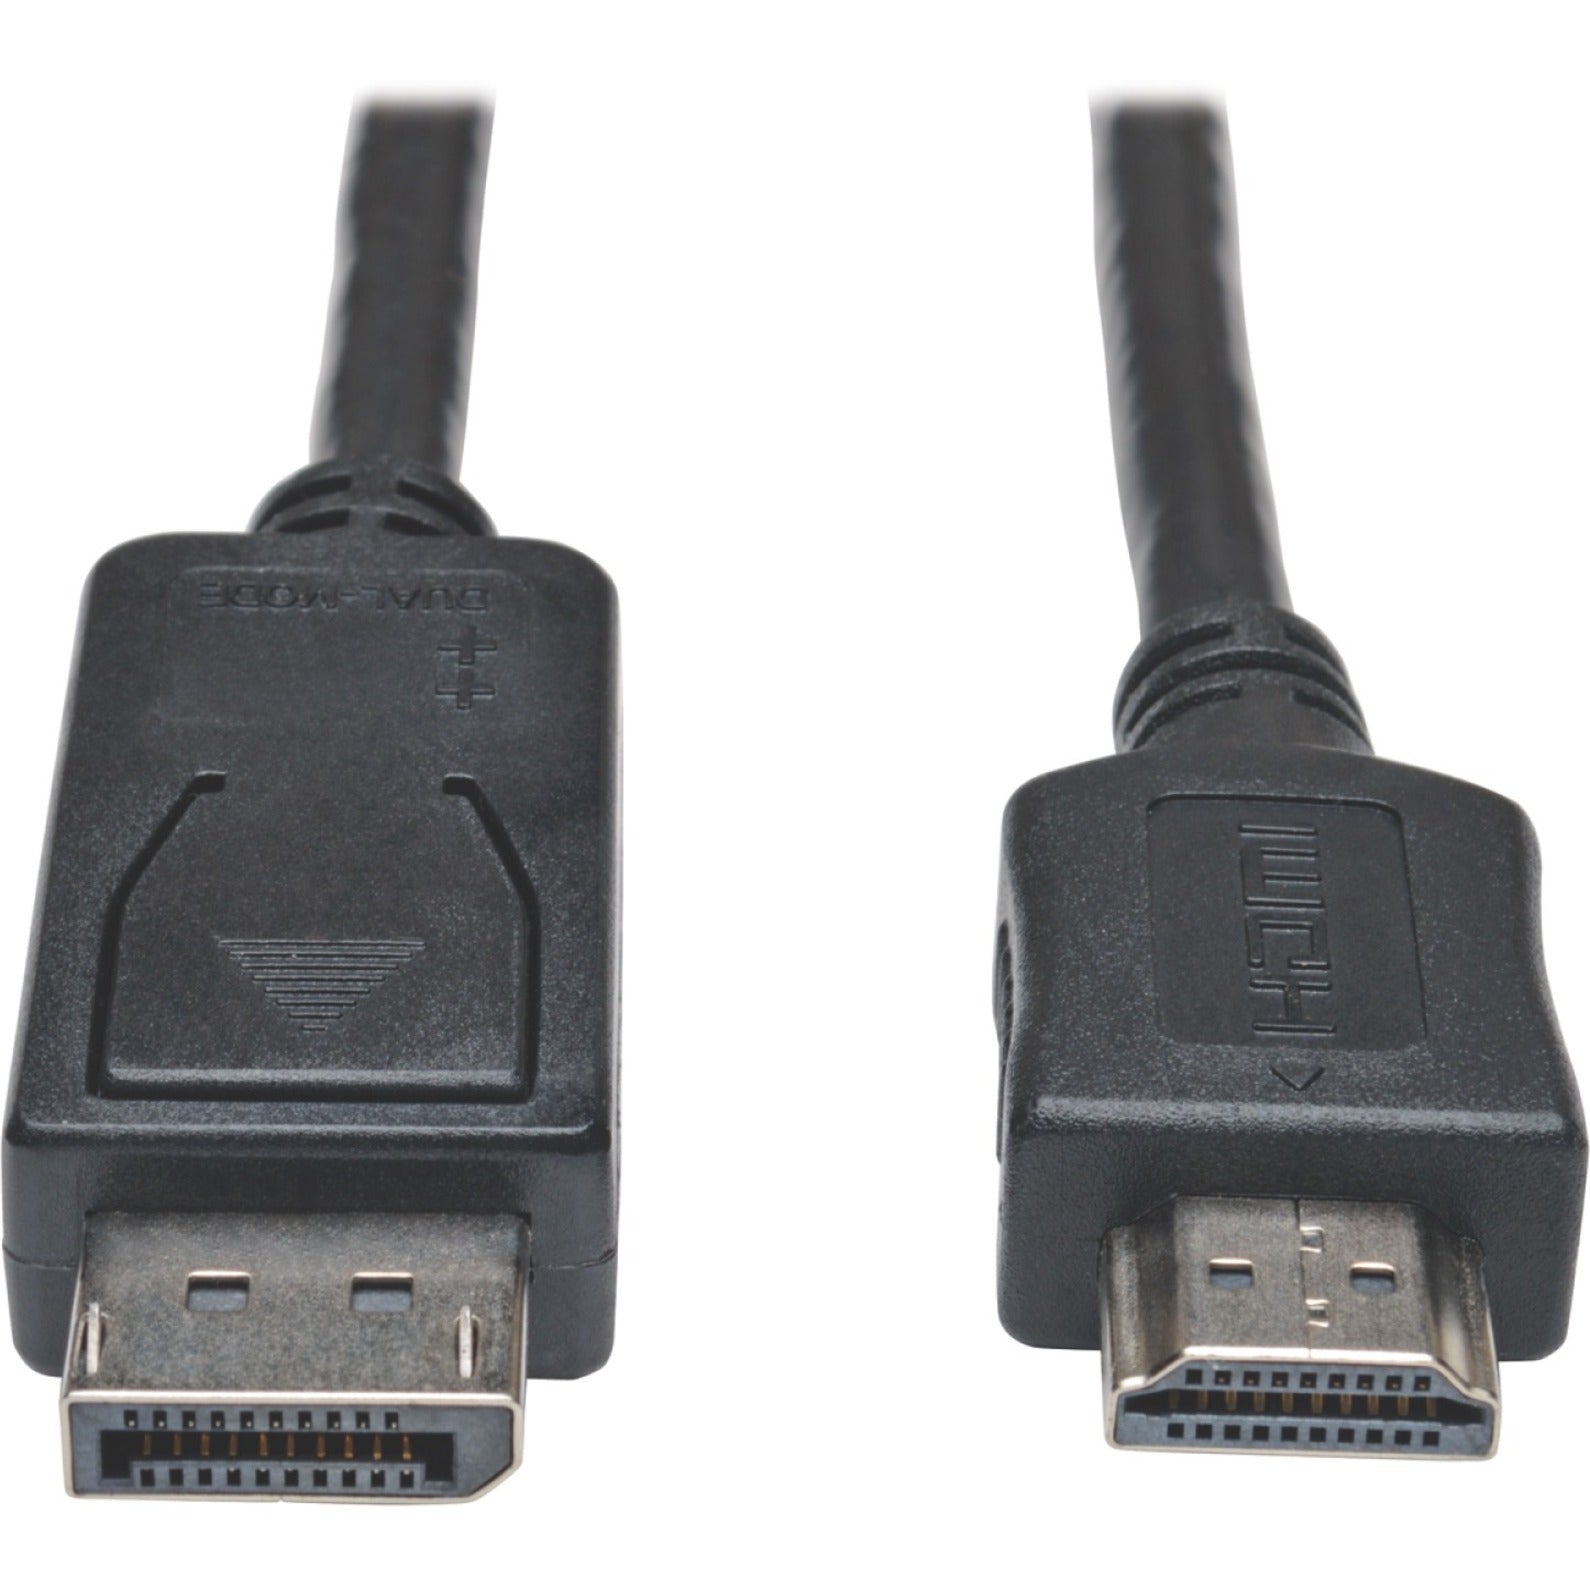 Tripp Lite P582-015 DisplayPort to HD Adapter Cable (M/M), 1080p, 15 ft.